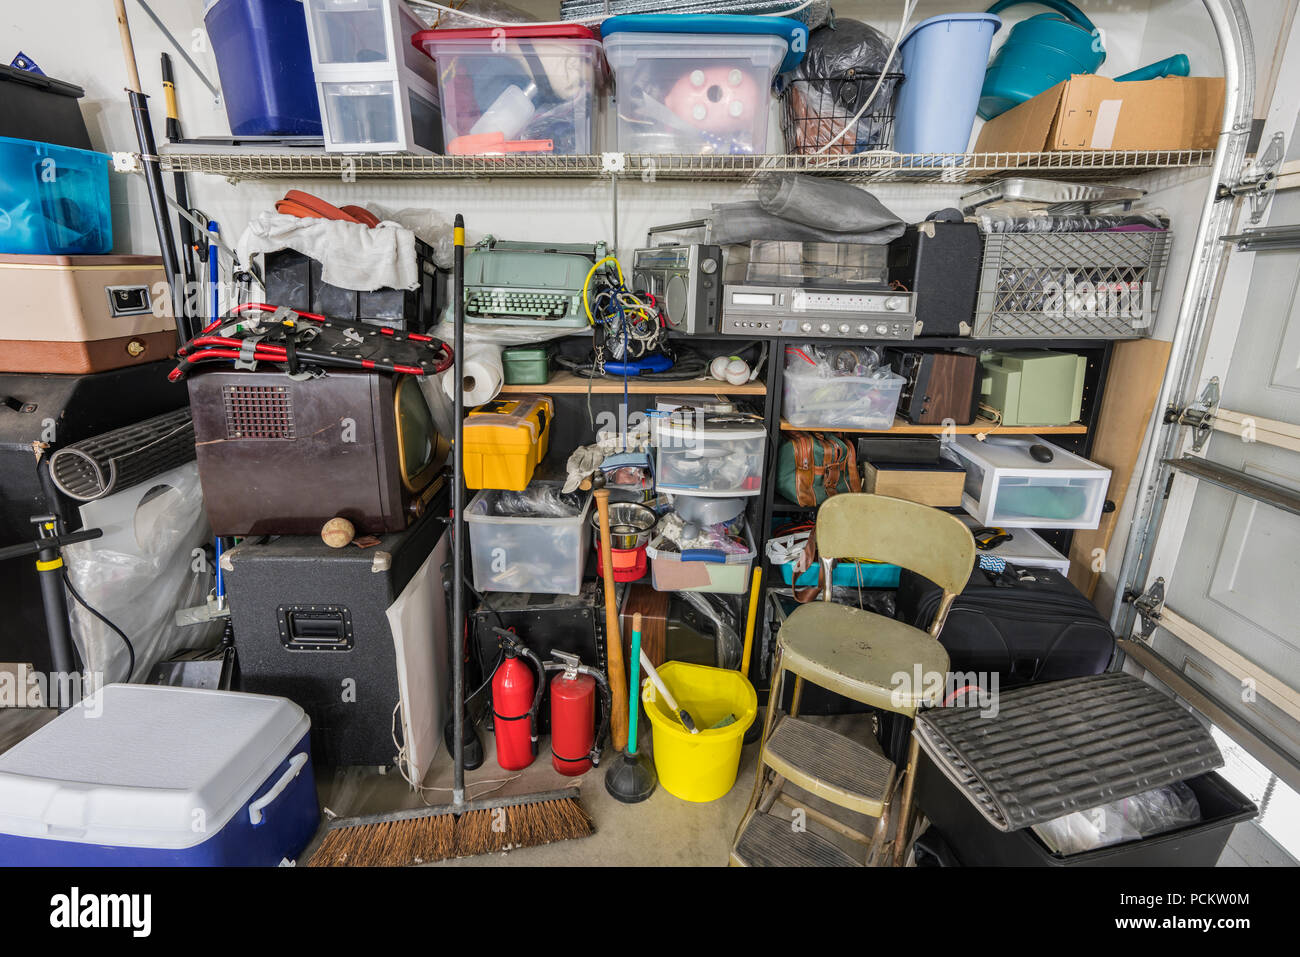 Messy cluttered junk filled suburban garage shelves with vintage electronics, housewares and sports equipment. Stock Photo